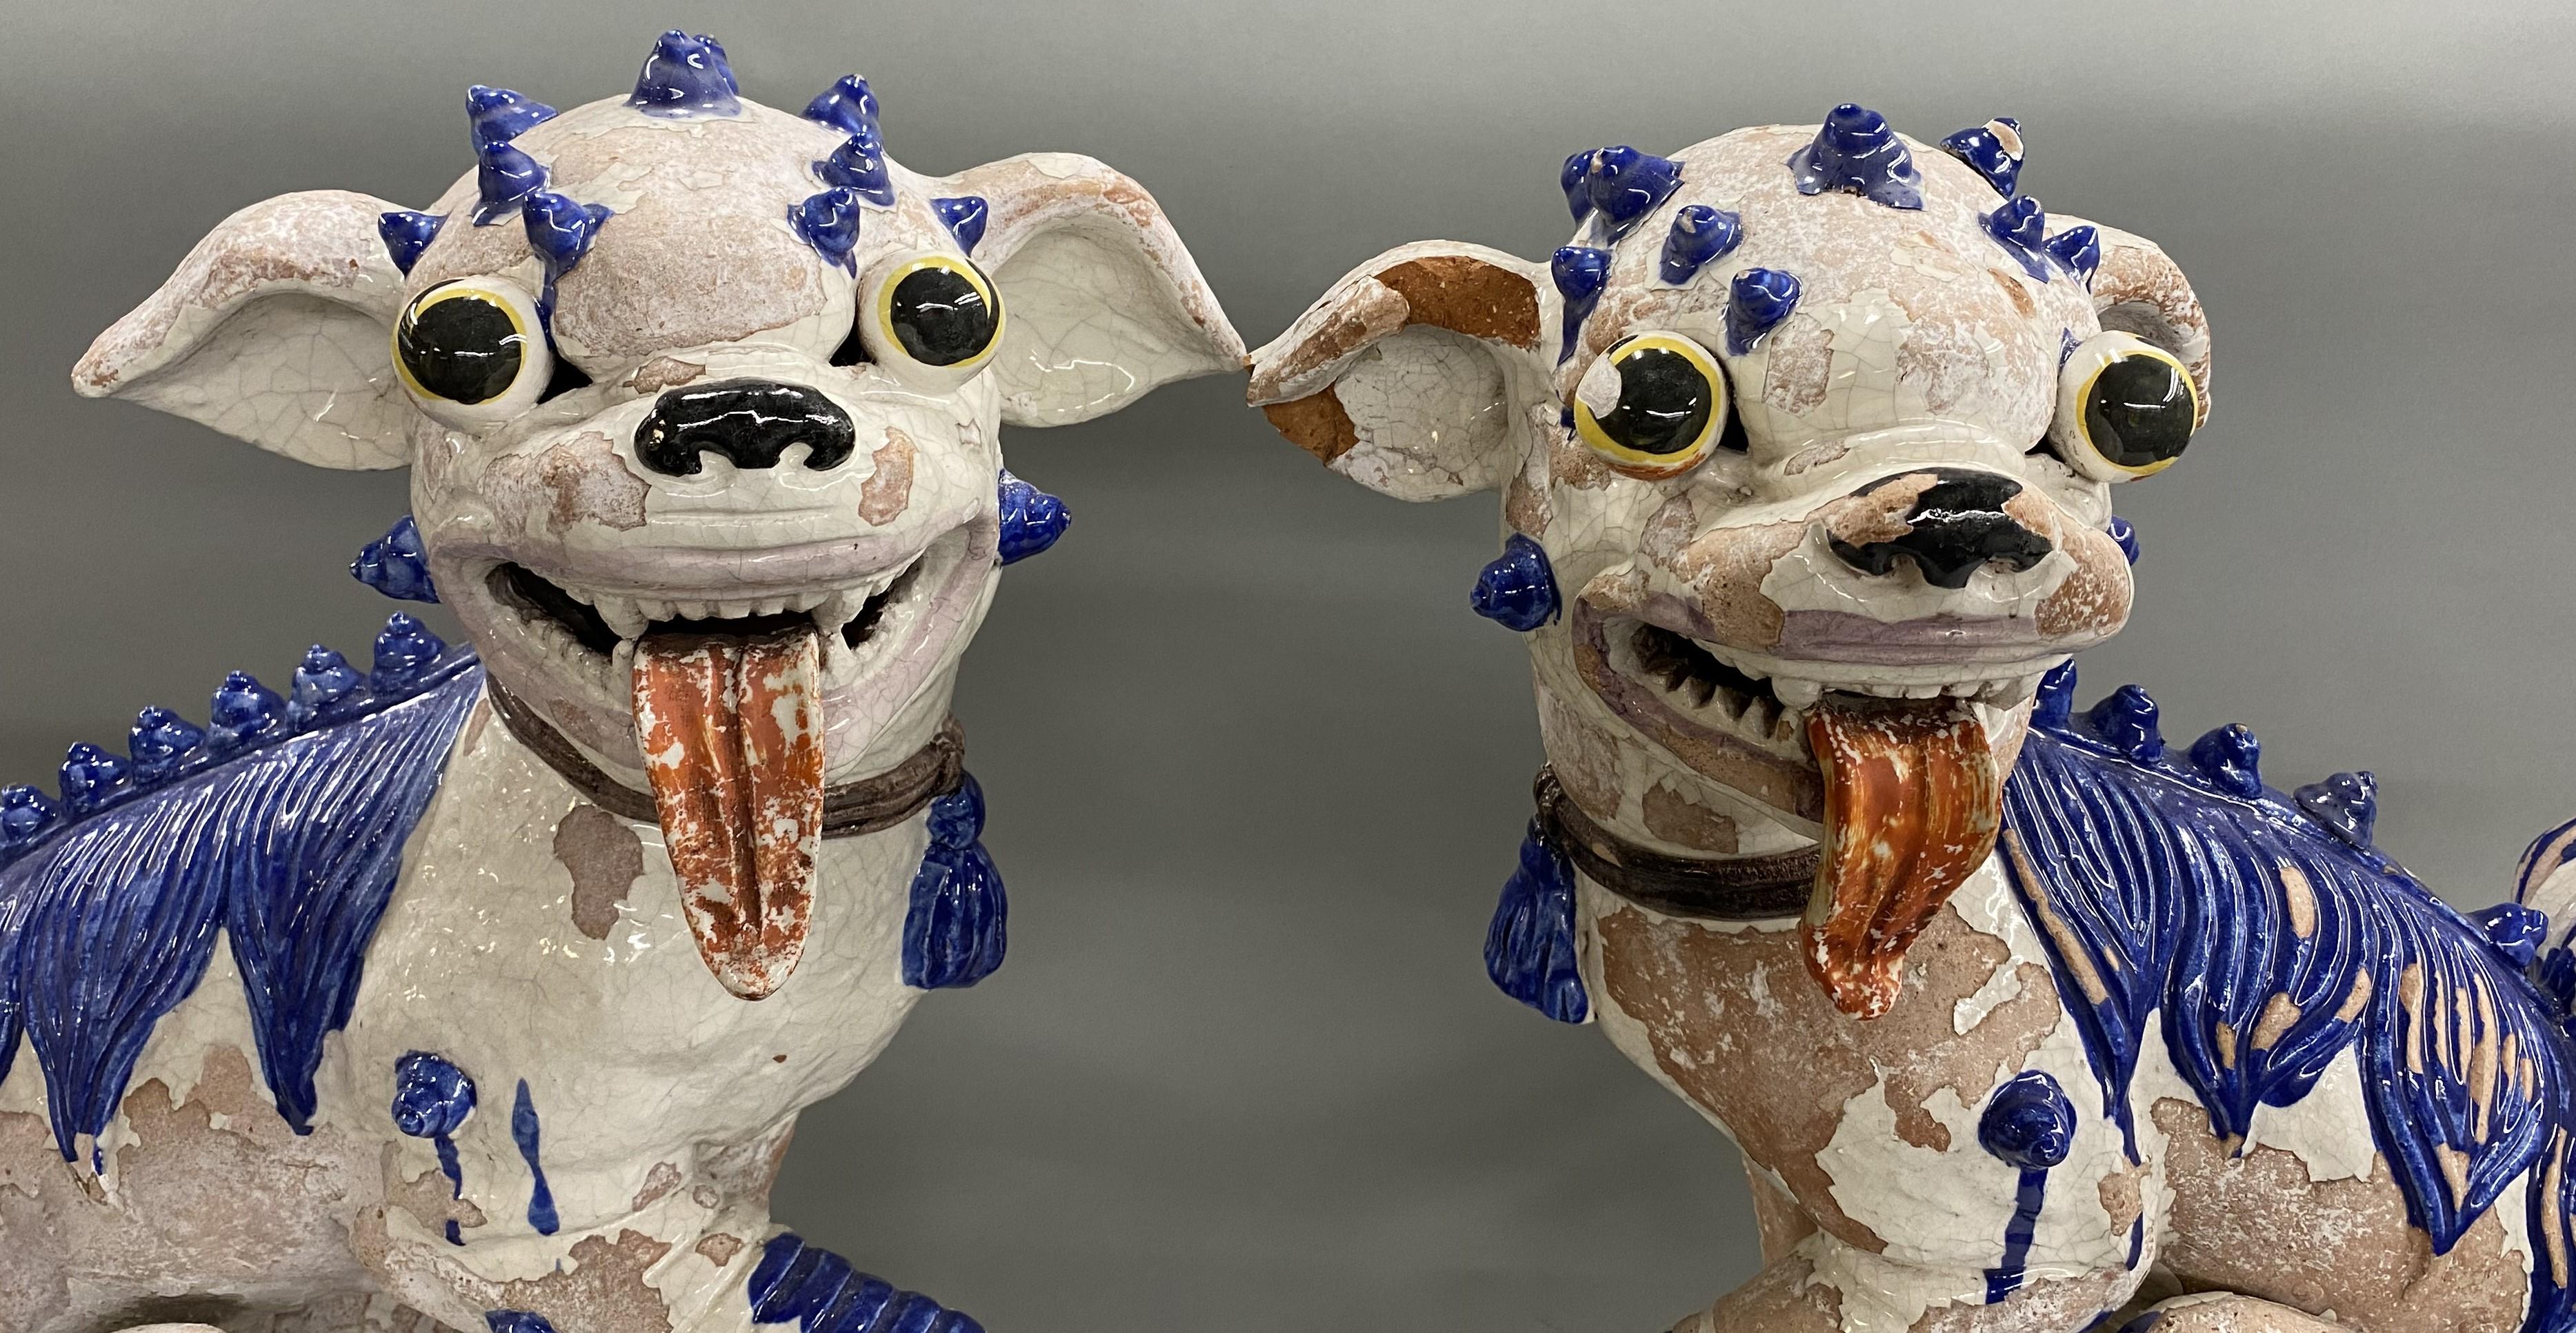 A large pair of Chinese tin glazed pottery or earthenware Foo Dogs, one with a ball under his paw and the other with a small pup. The pair date to the 20th century, with noticeable surface glaze losses, some corner losses, craquelure throughout, and